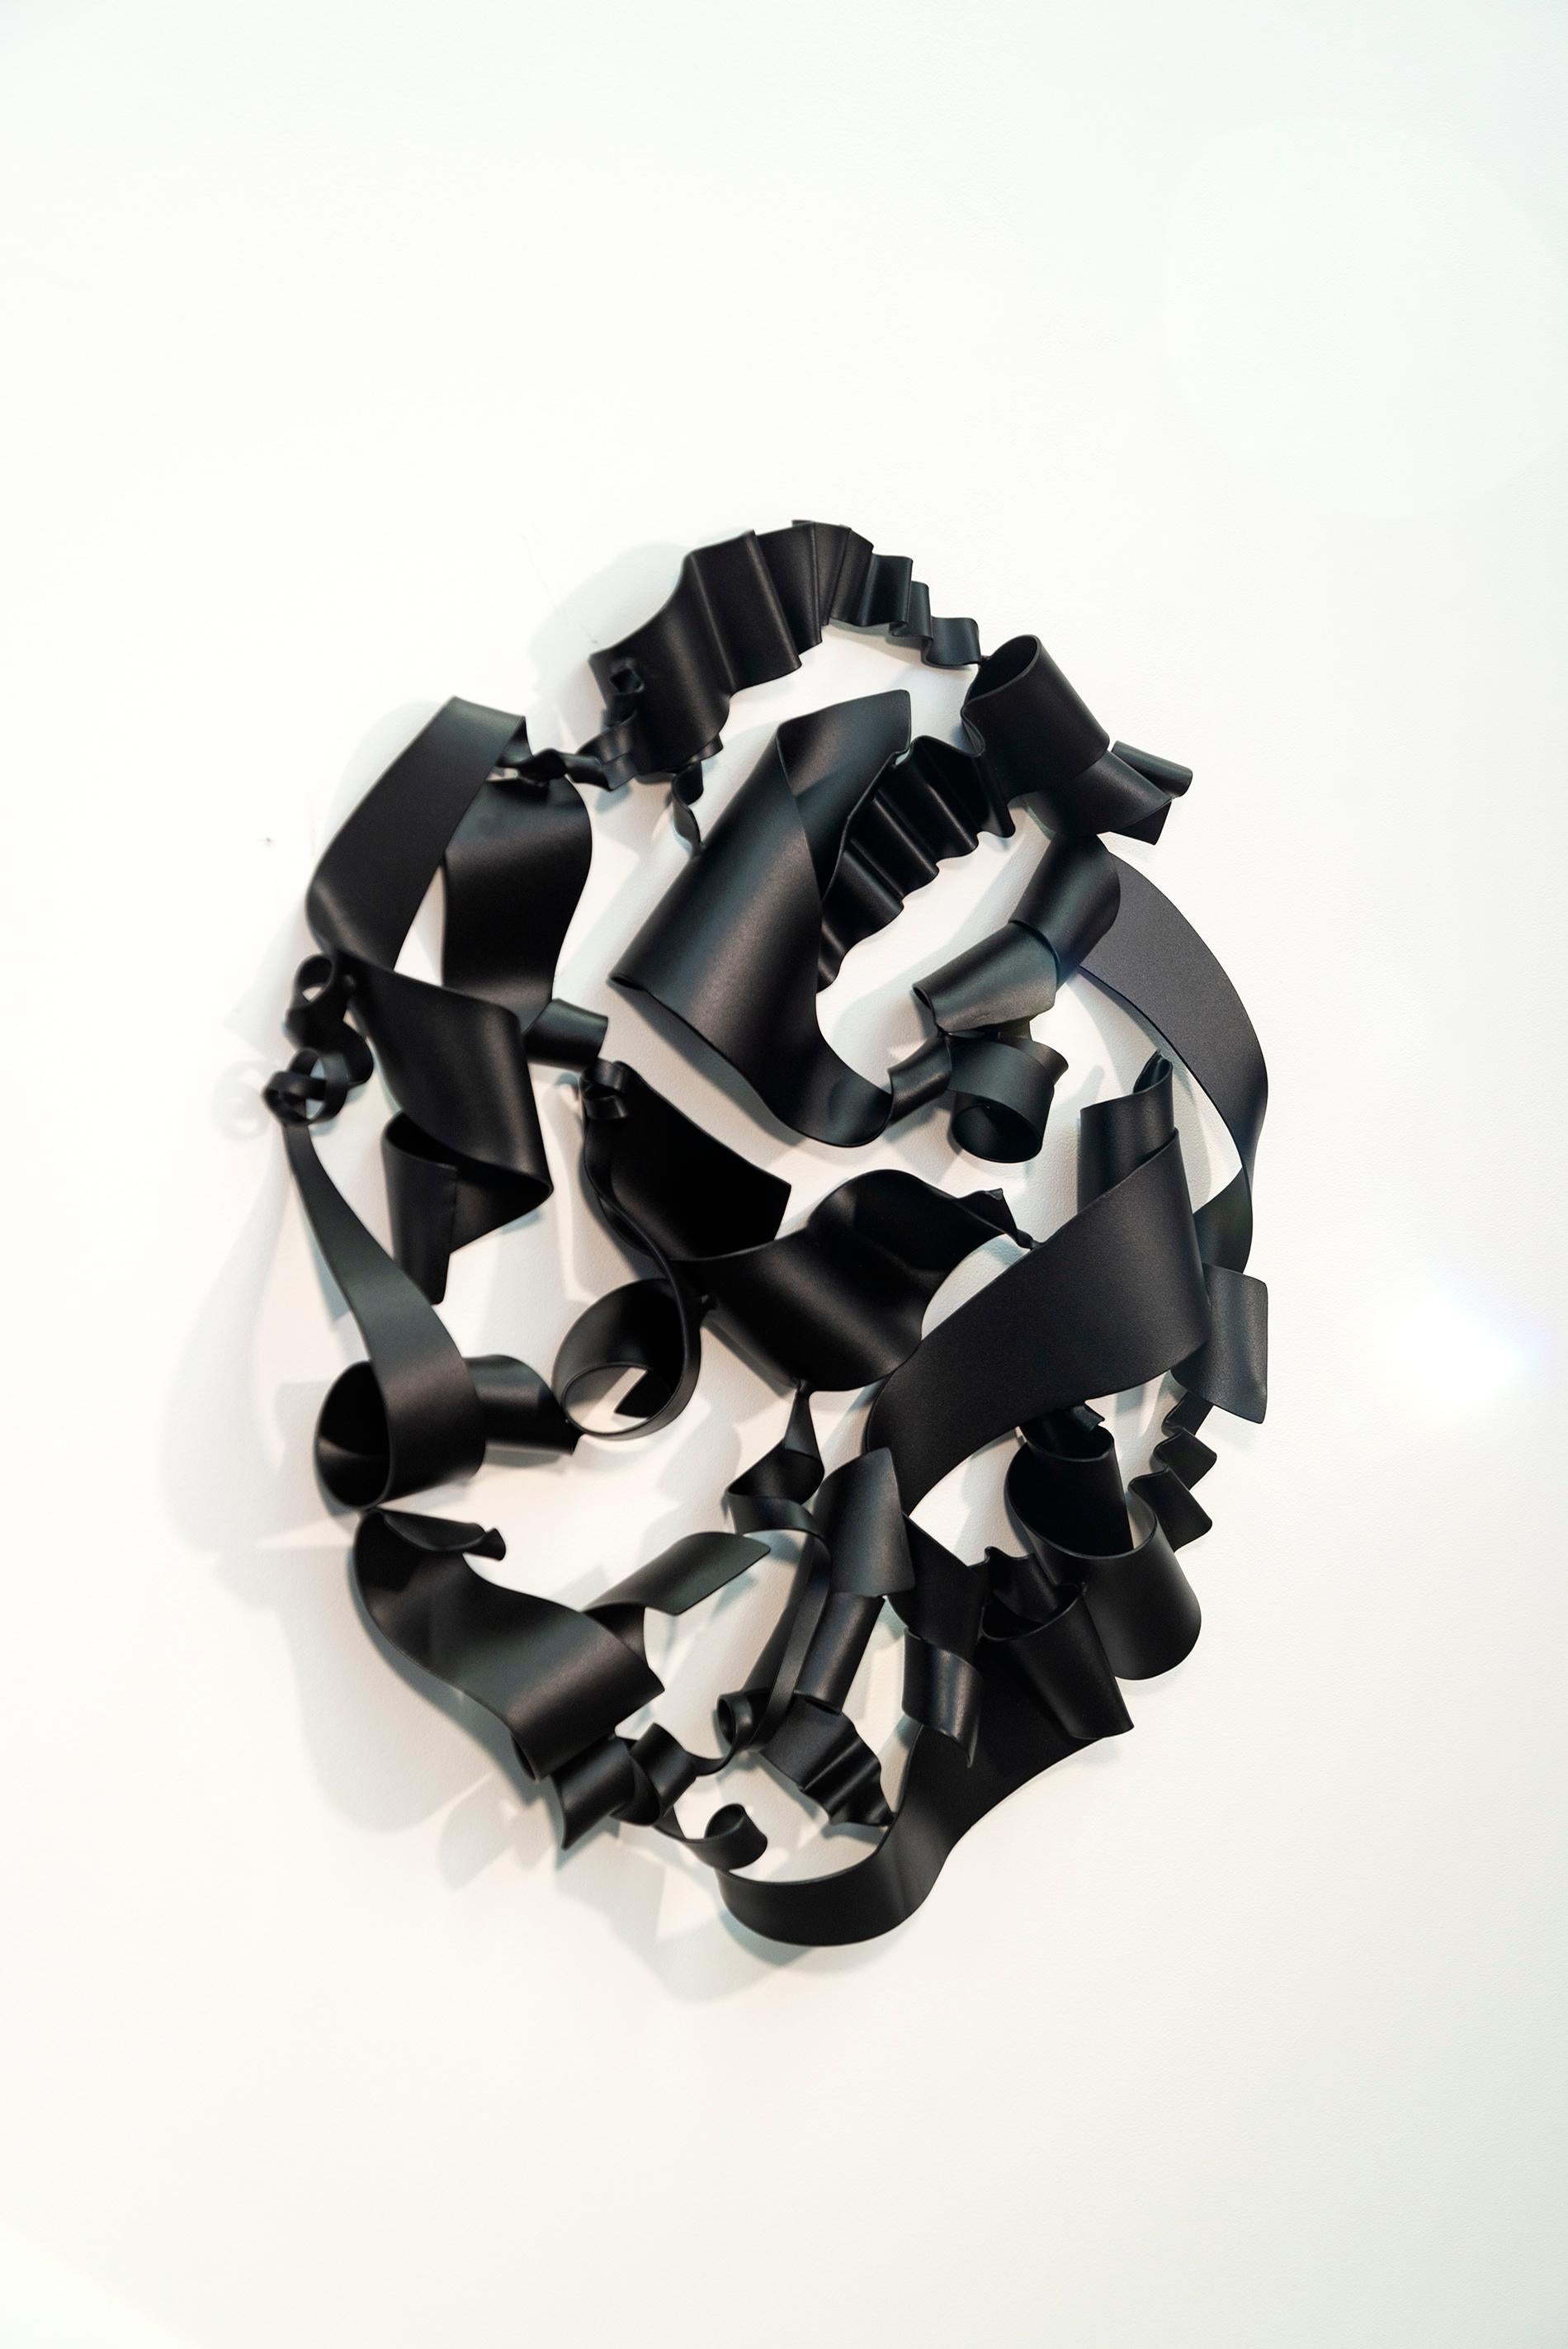 In elegant black, this expressive abstract wall sculpture was created by Stefan Duerst. The German born artist’s ethereal work hand forges steel into swirling ribbons that form dynamic compositions. The energy of this piece is accentuated by its